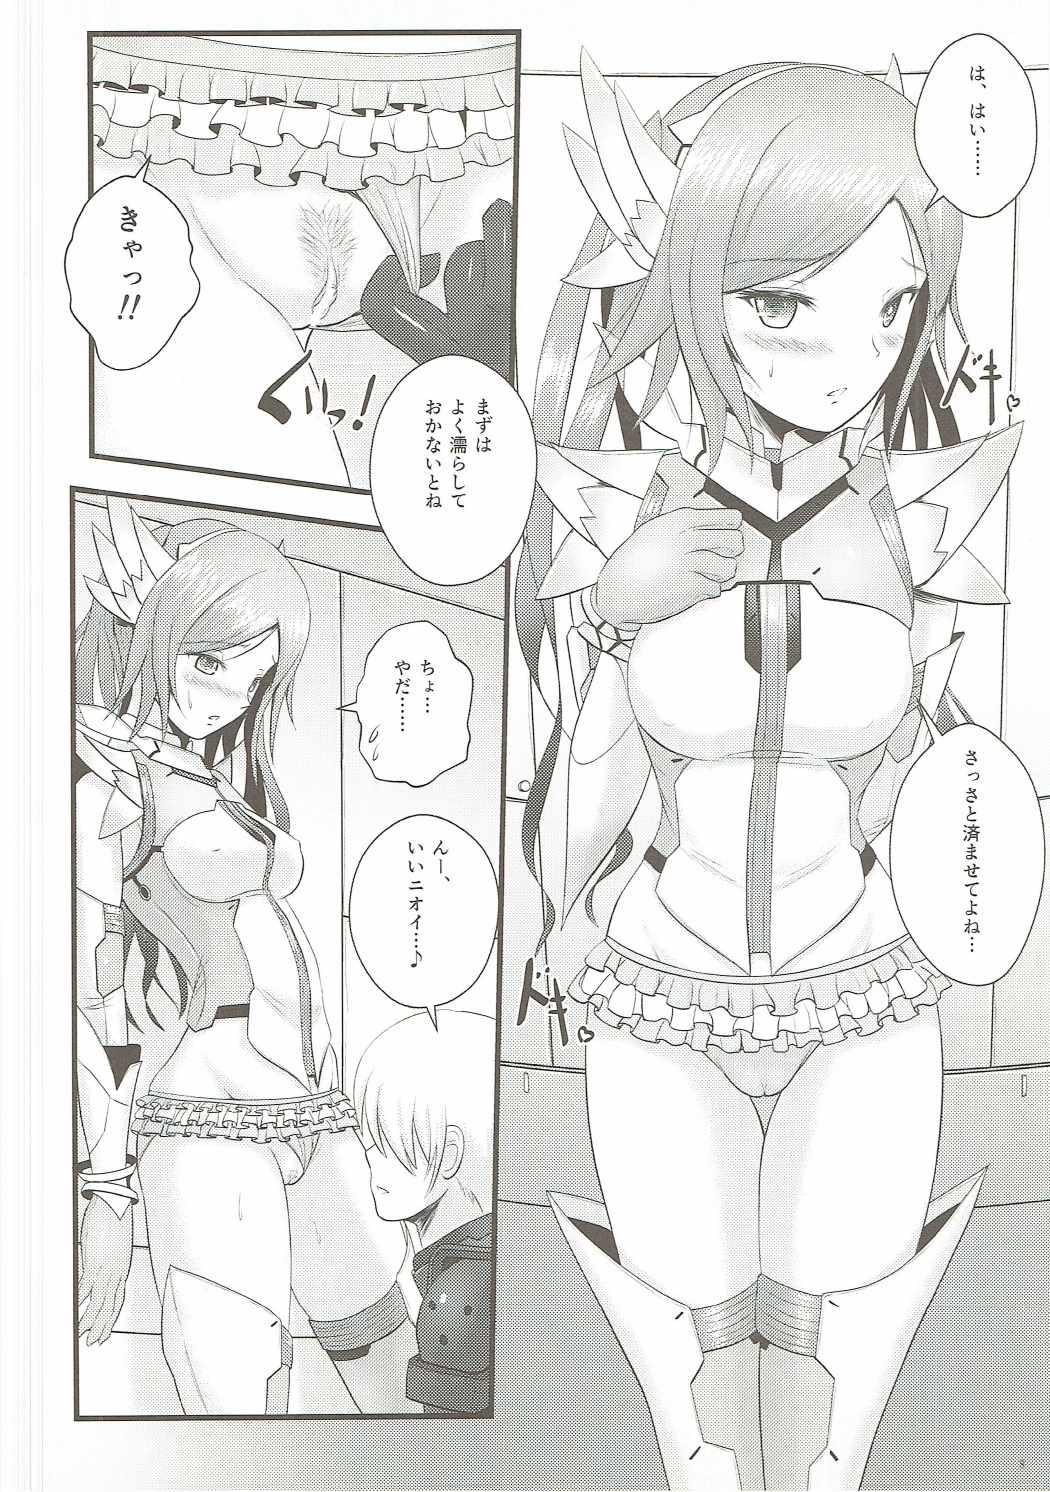 Celeb Seagull's Love Song - Phantasy star online 2 Anal Sex - Page 5